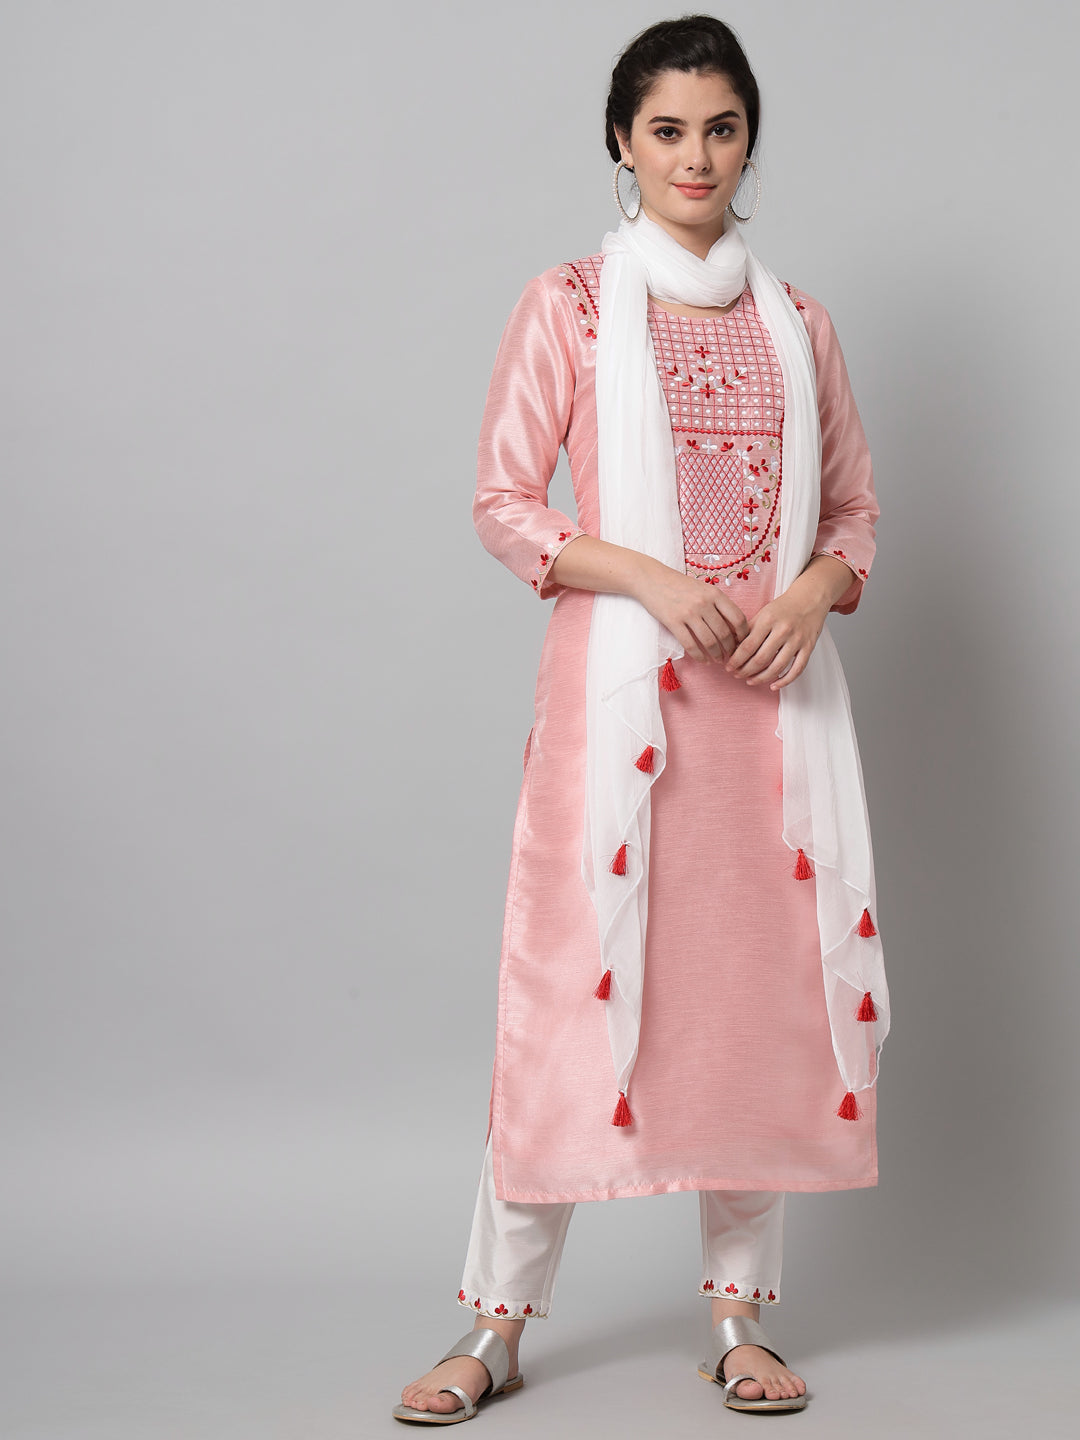 Women's Pink Kurta Trouser Set With White And Red Floral Embroidery - Noz2Toz